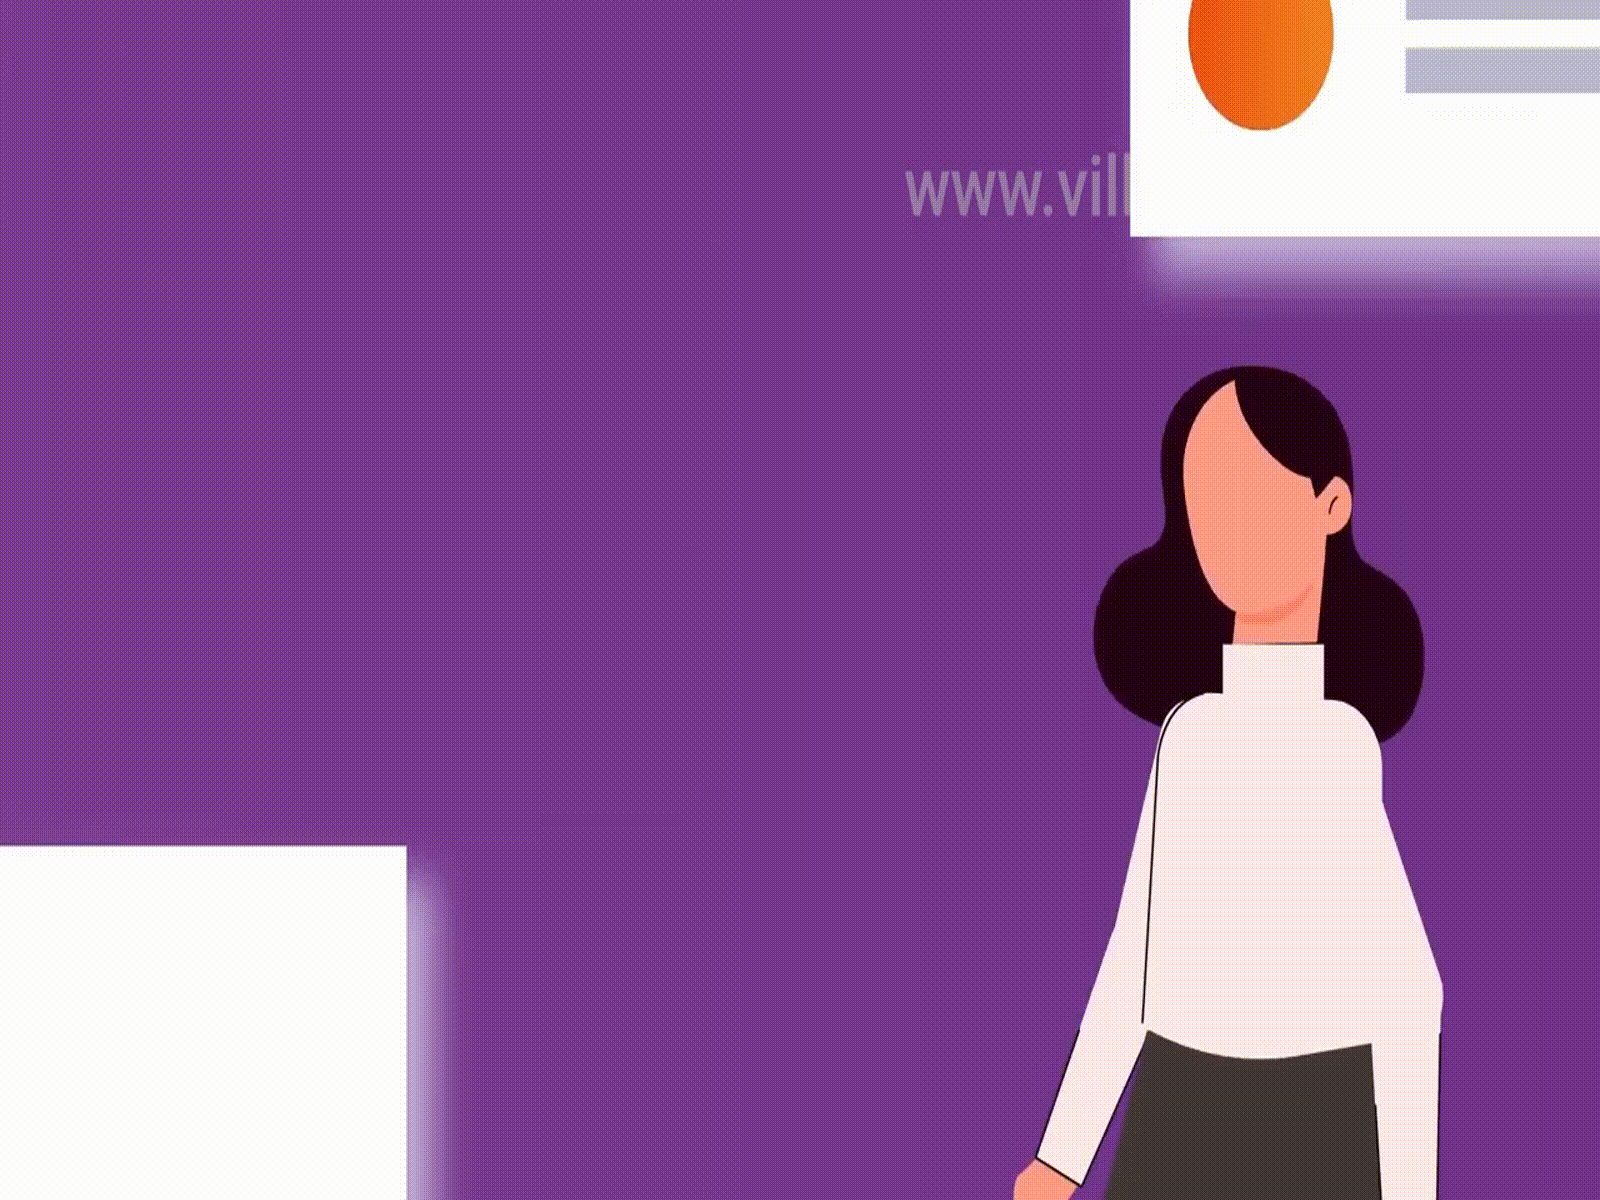 How to pursue client satisfaction with high-quality video 2d animation 3d animation animation video animationcompanyinindia animationvideocompanyinbangalore animationvideomakerinbangalore explainer video explainervideocompanyinbangalore explainervideocompanyinchennai illustration village talkies whiteboard animation